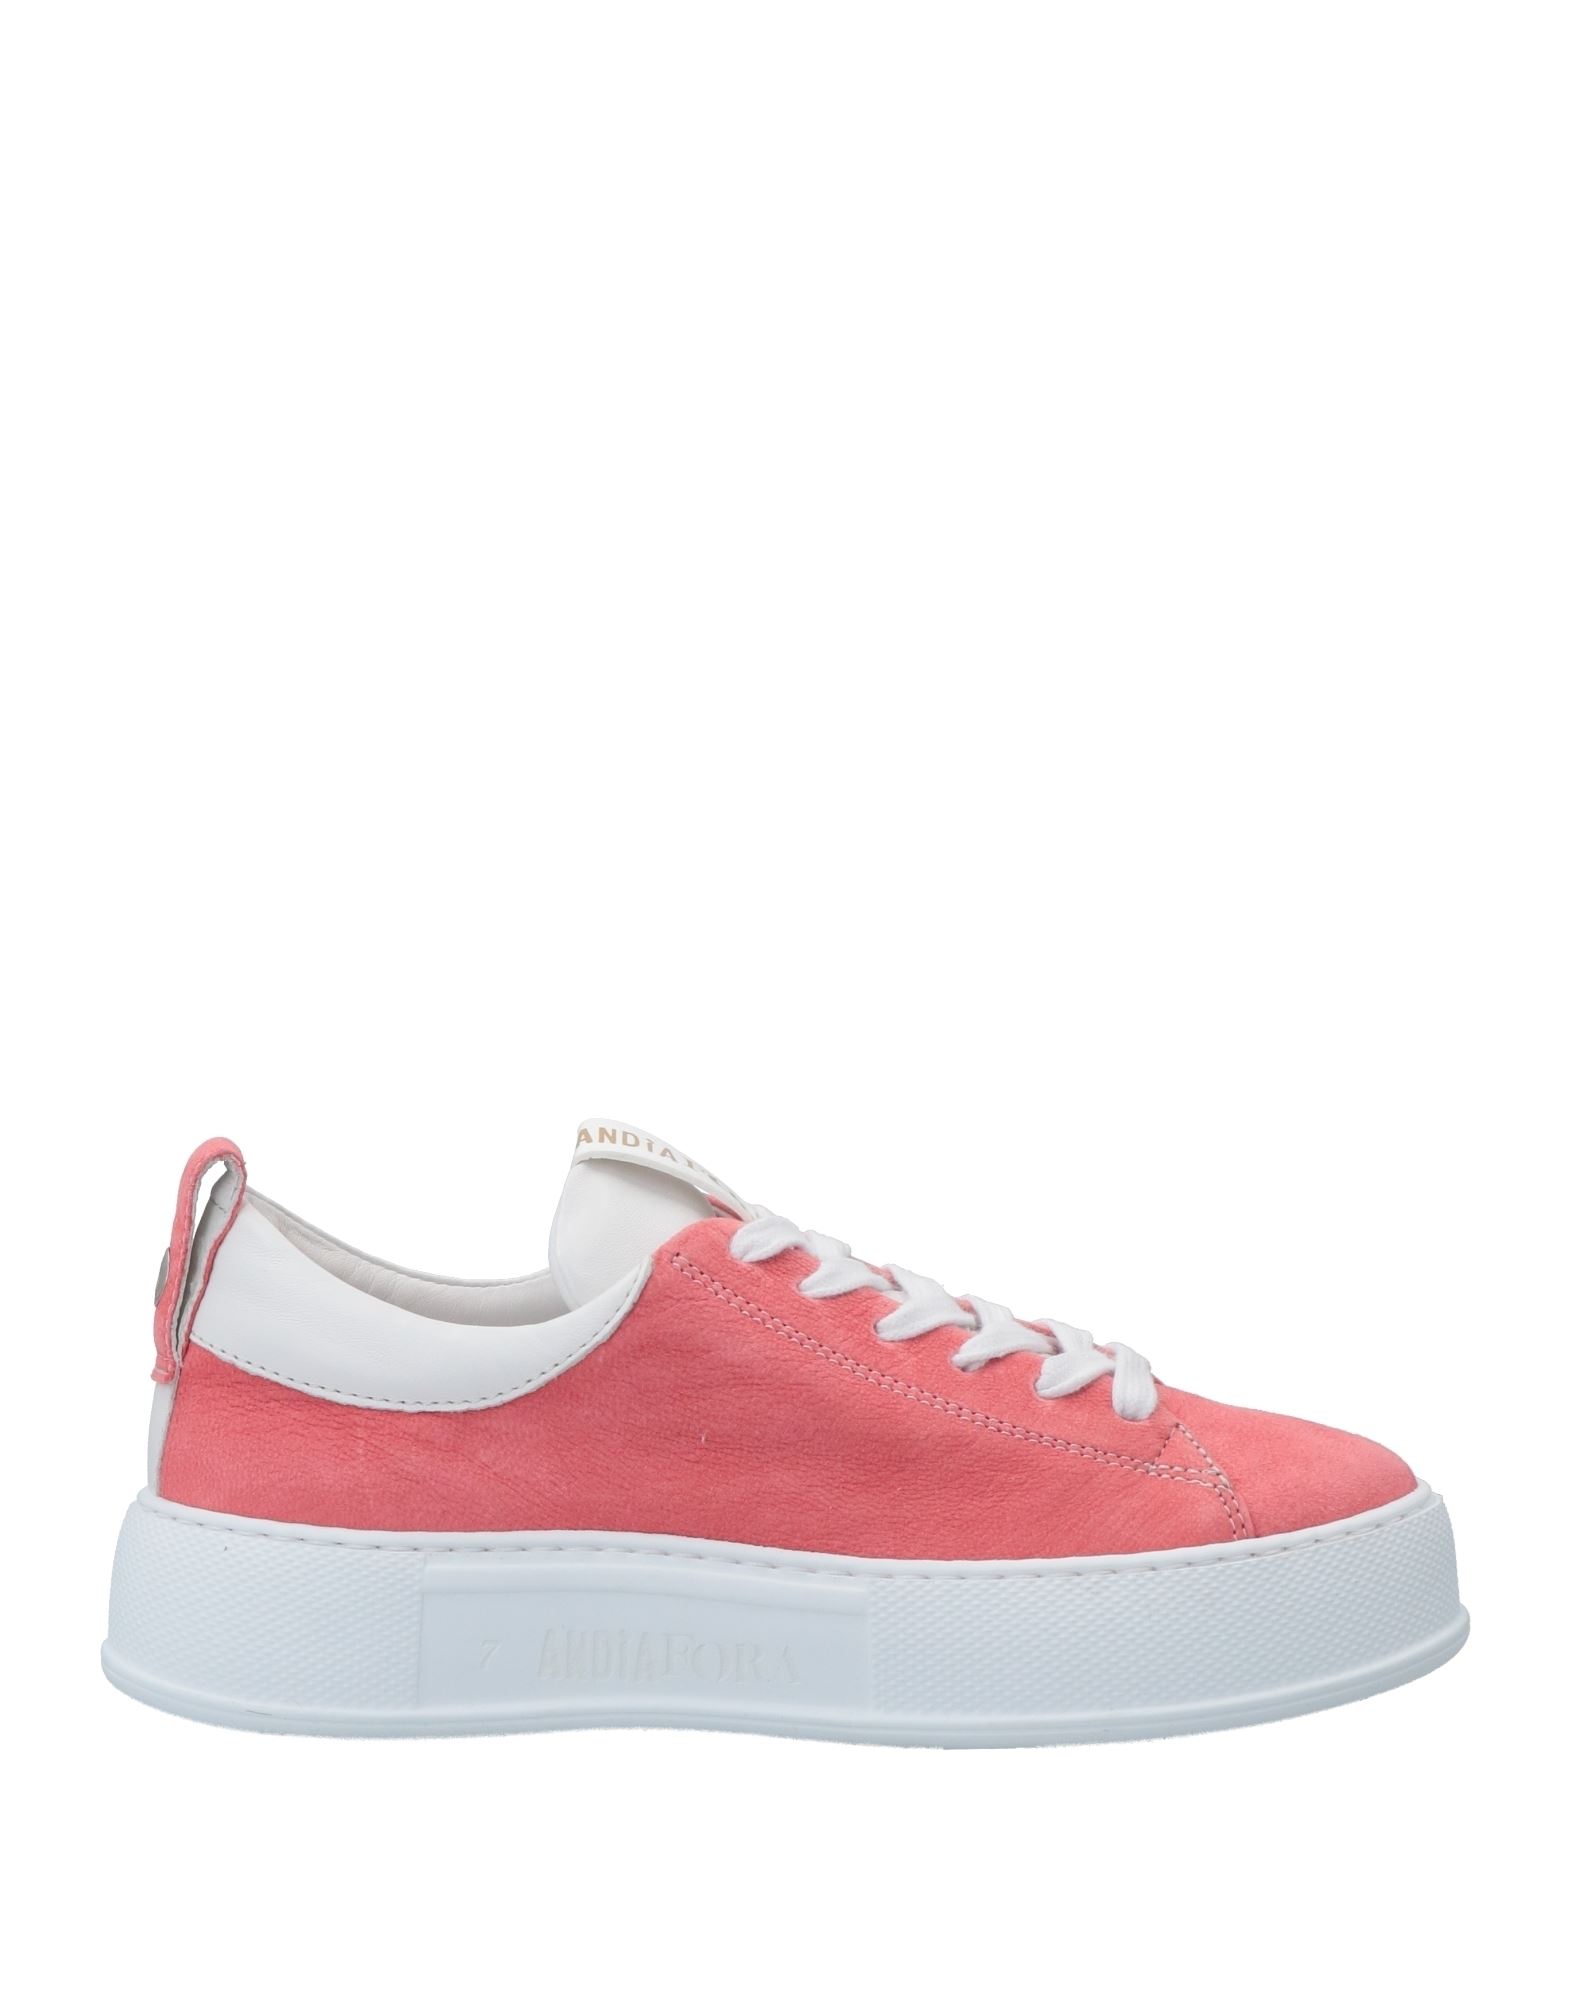 Andìa Fora Woman Sneakers Coral Size 10 Soft Leather In Red